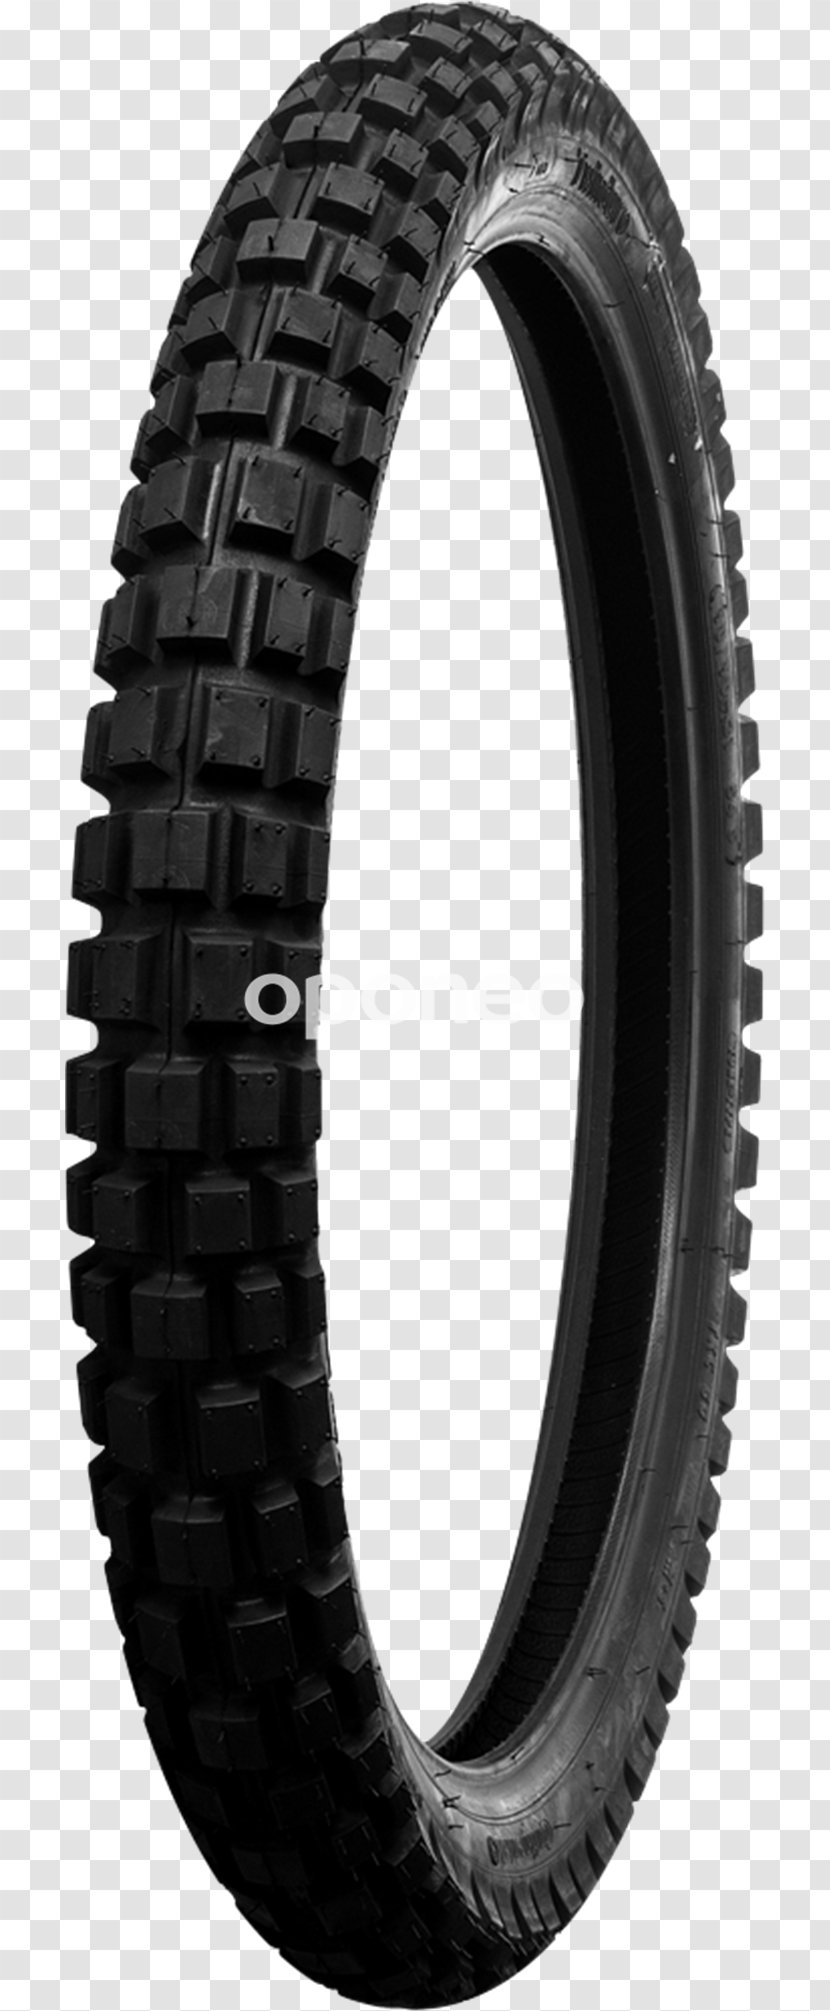 Continental AG Off-road Tire Motorcycle Kenda Rubber Industrial Company - Offroad Transparent PNG